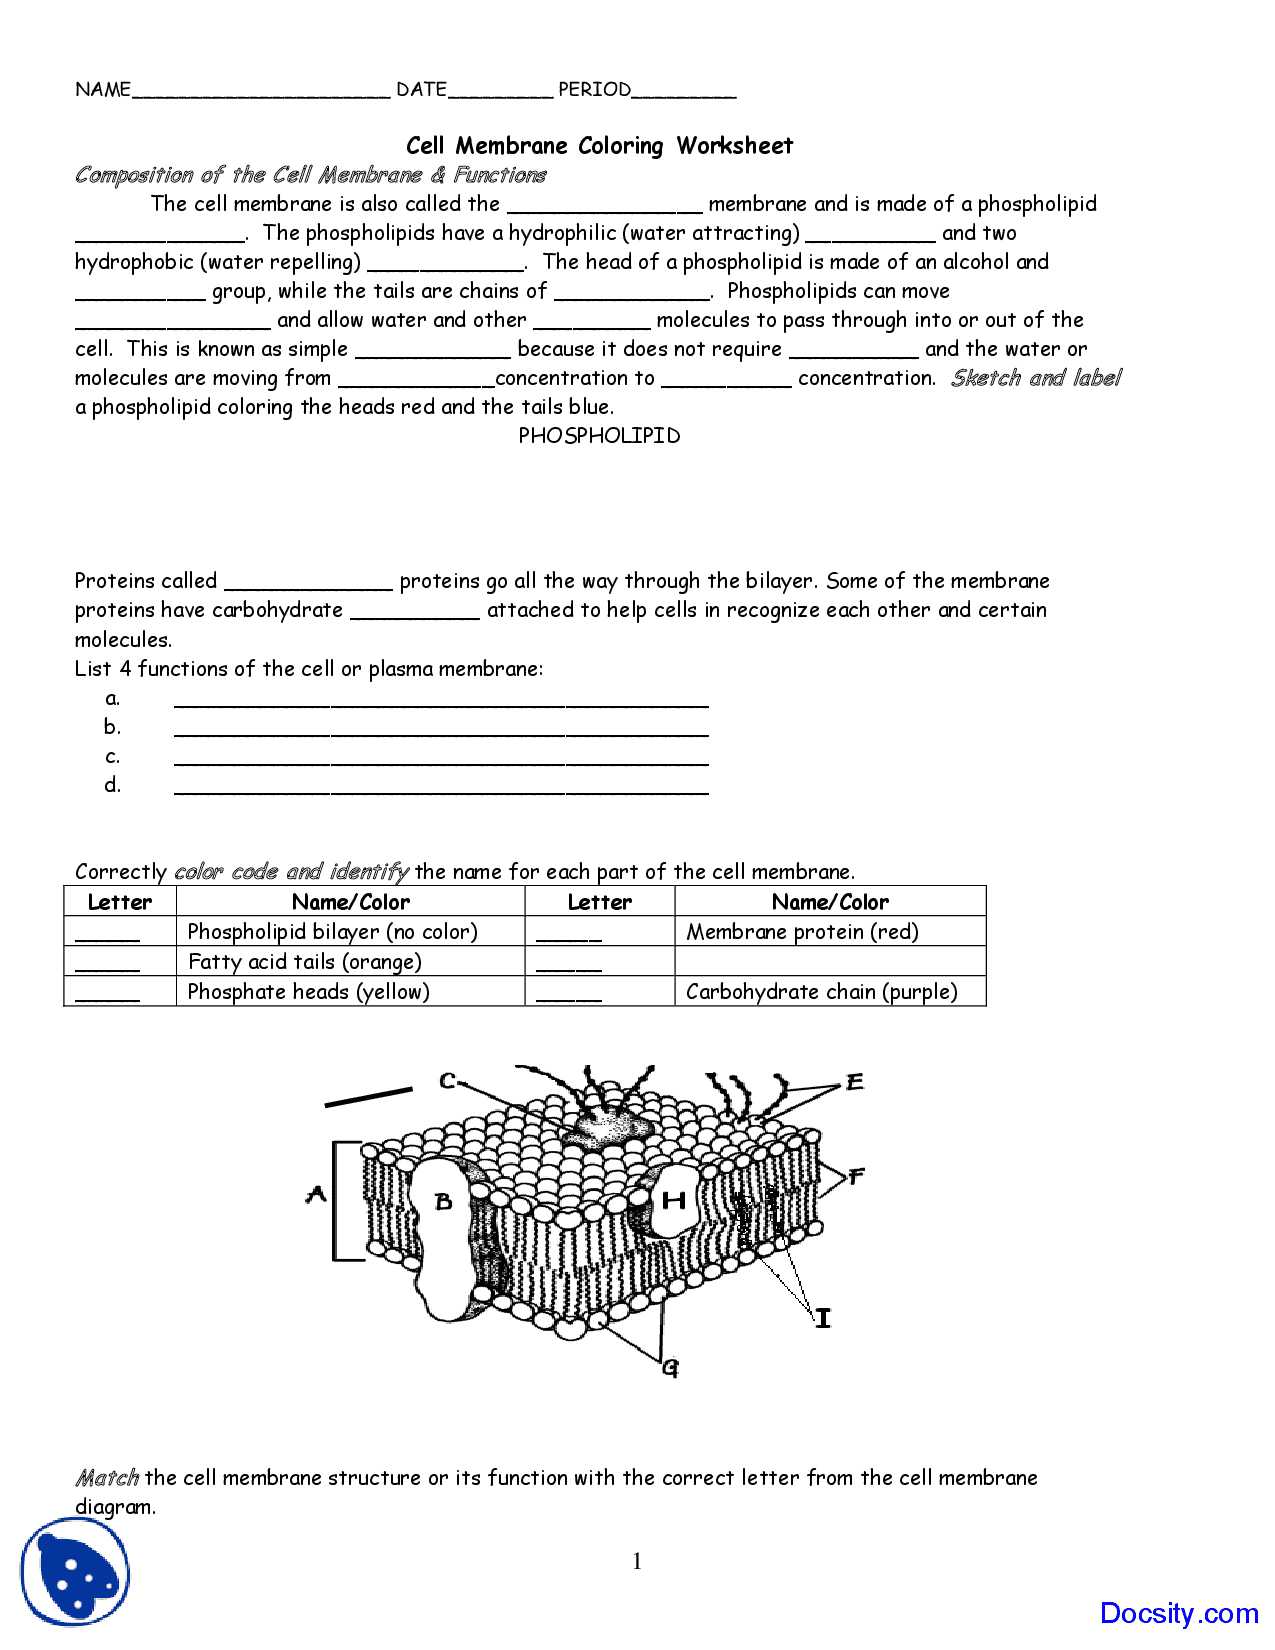 Transport In Cells Worksheet Answers as Well as with Cell Membrane Coloring Worksheet Coloring Pages Answers